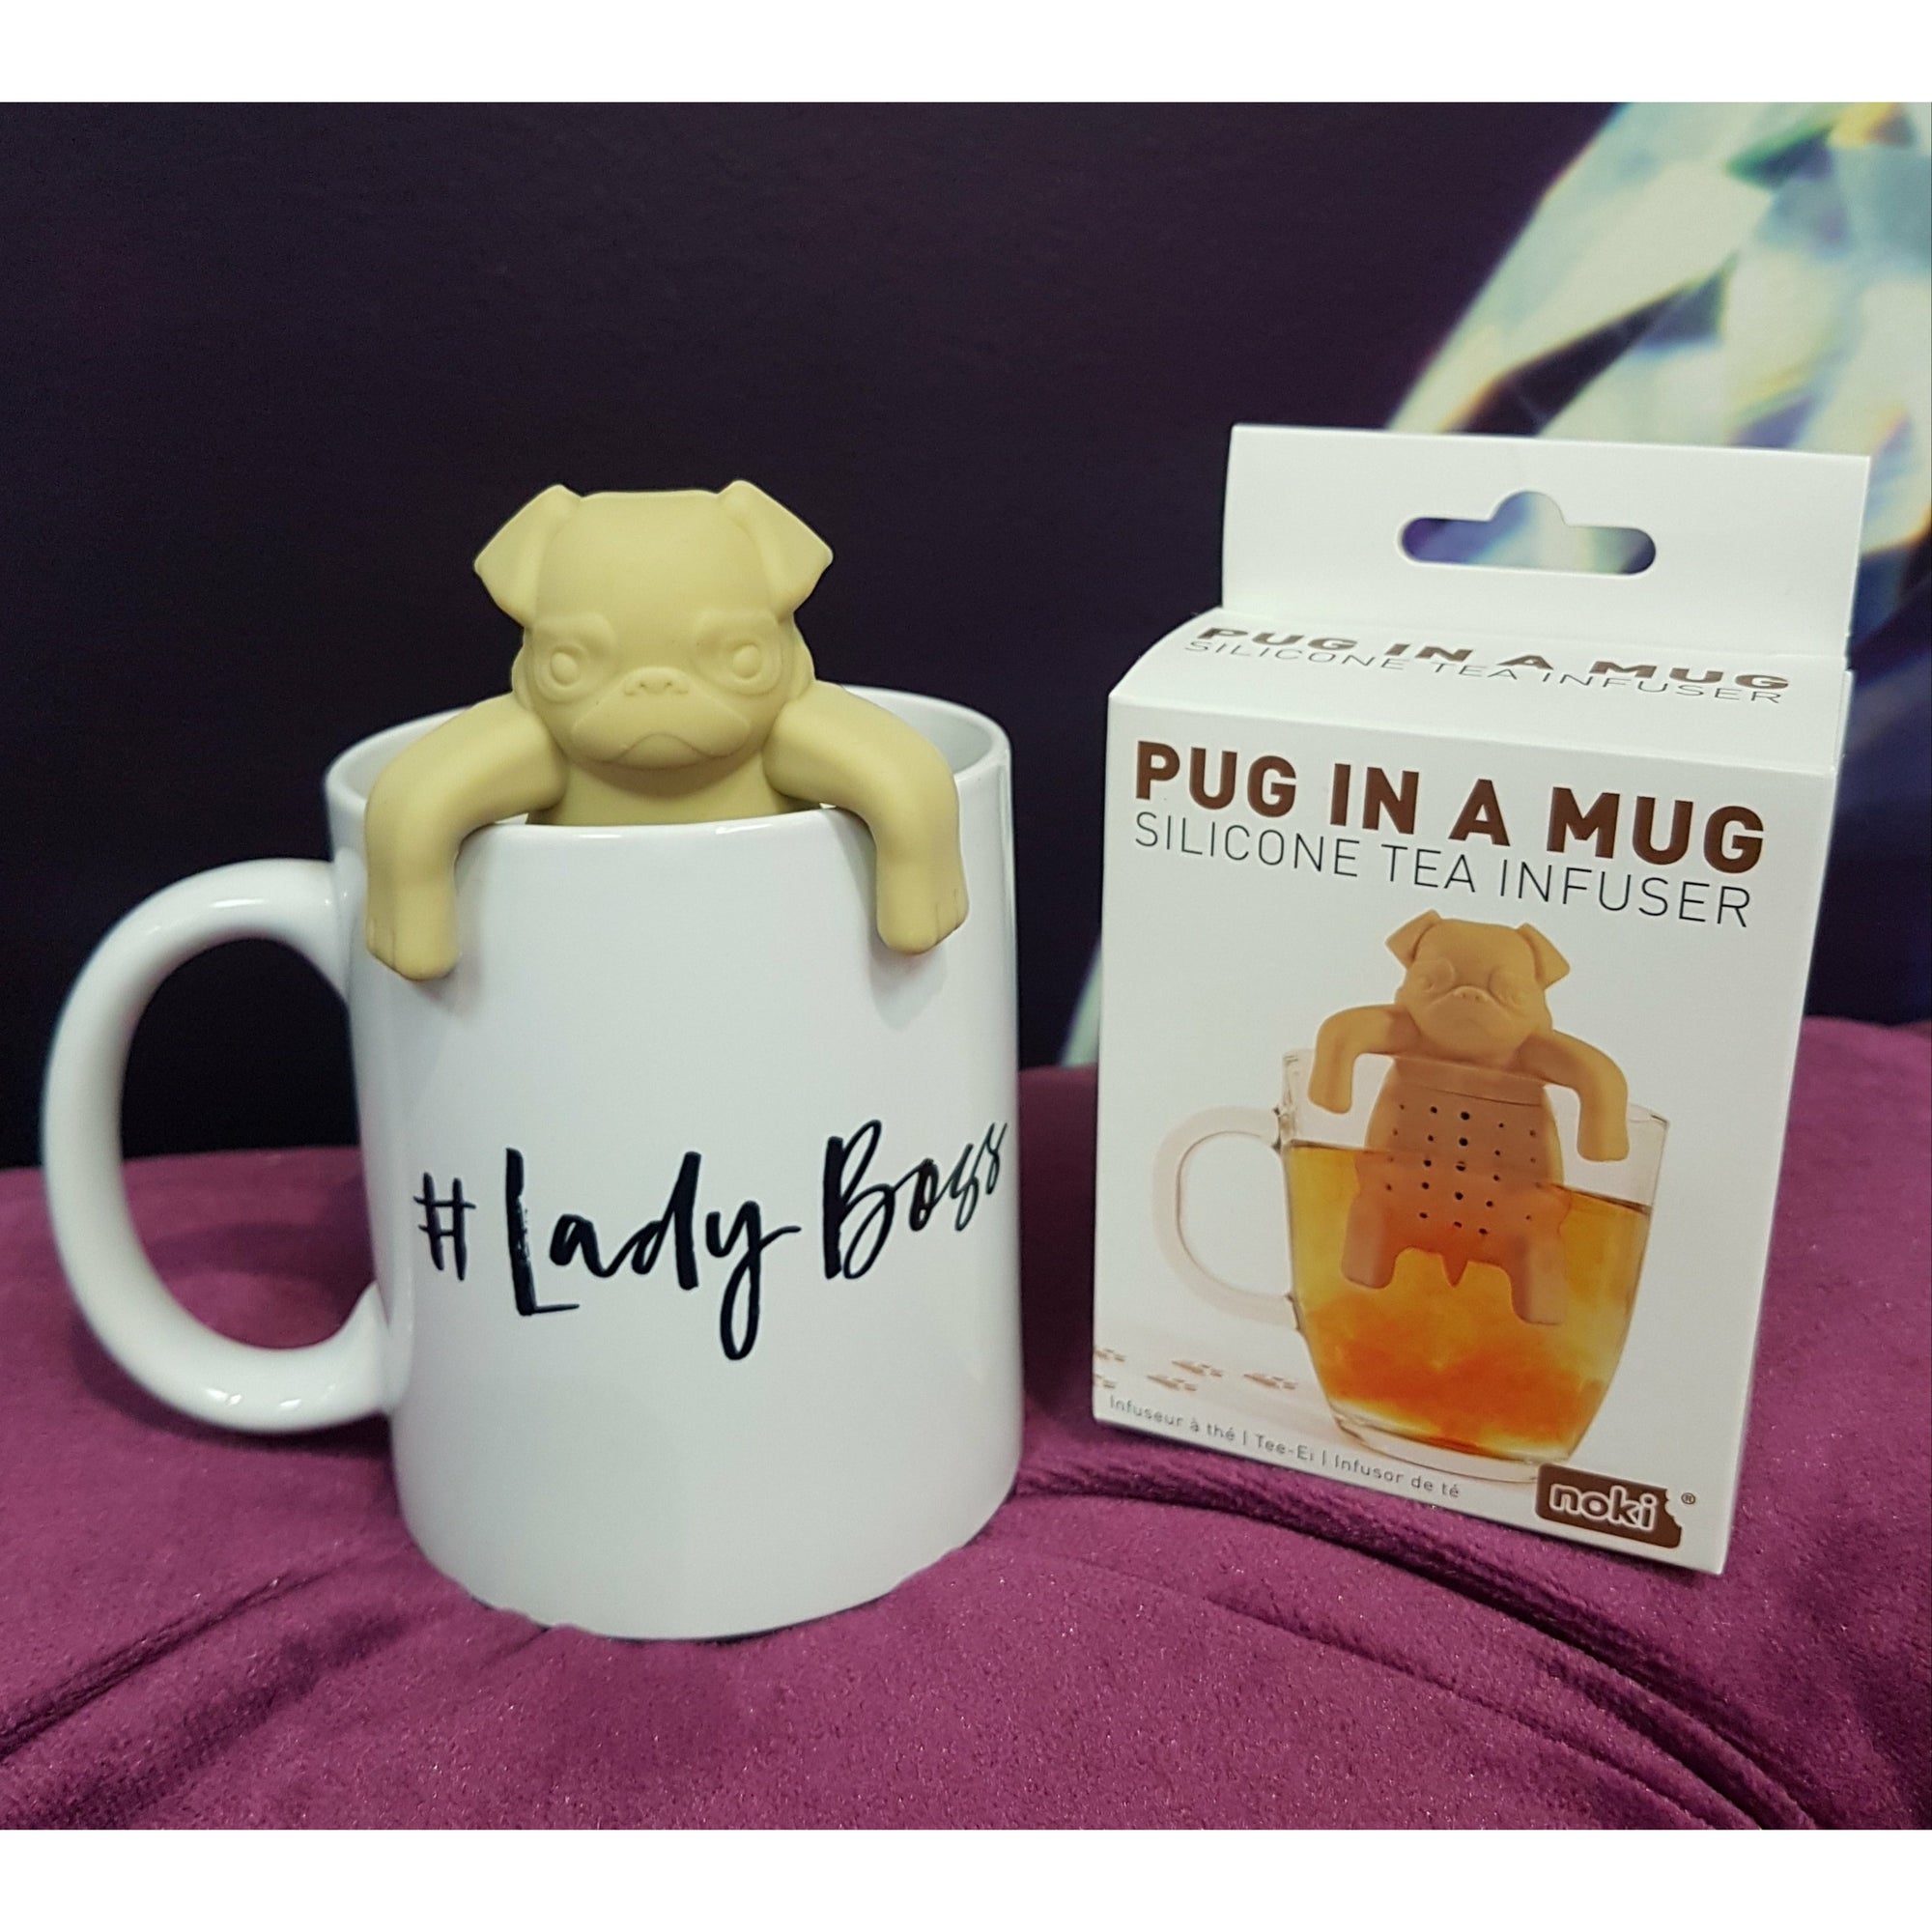 TEA INFUSER PUG IN A MUG Not specified